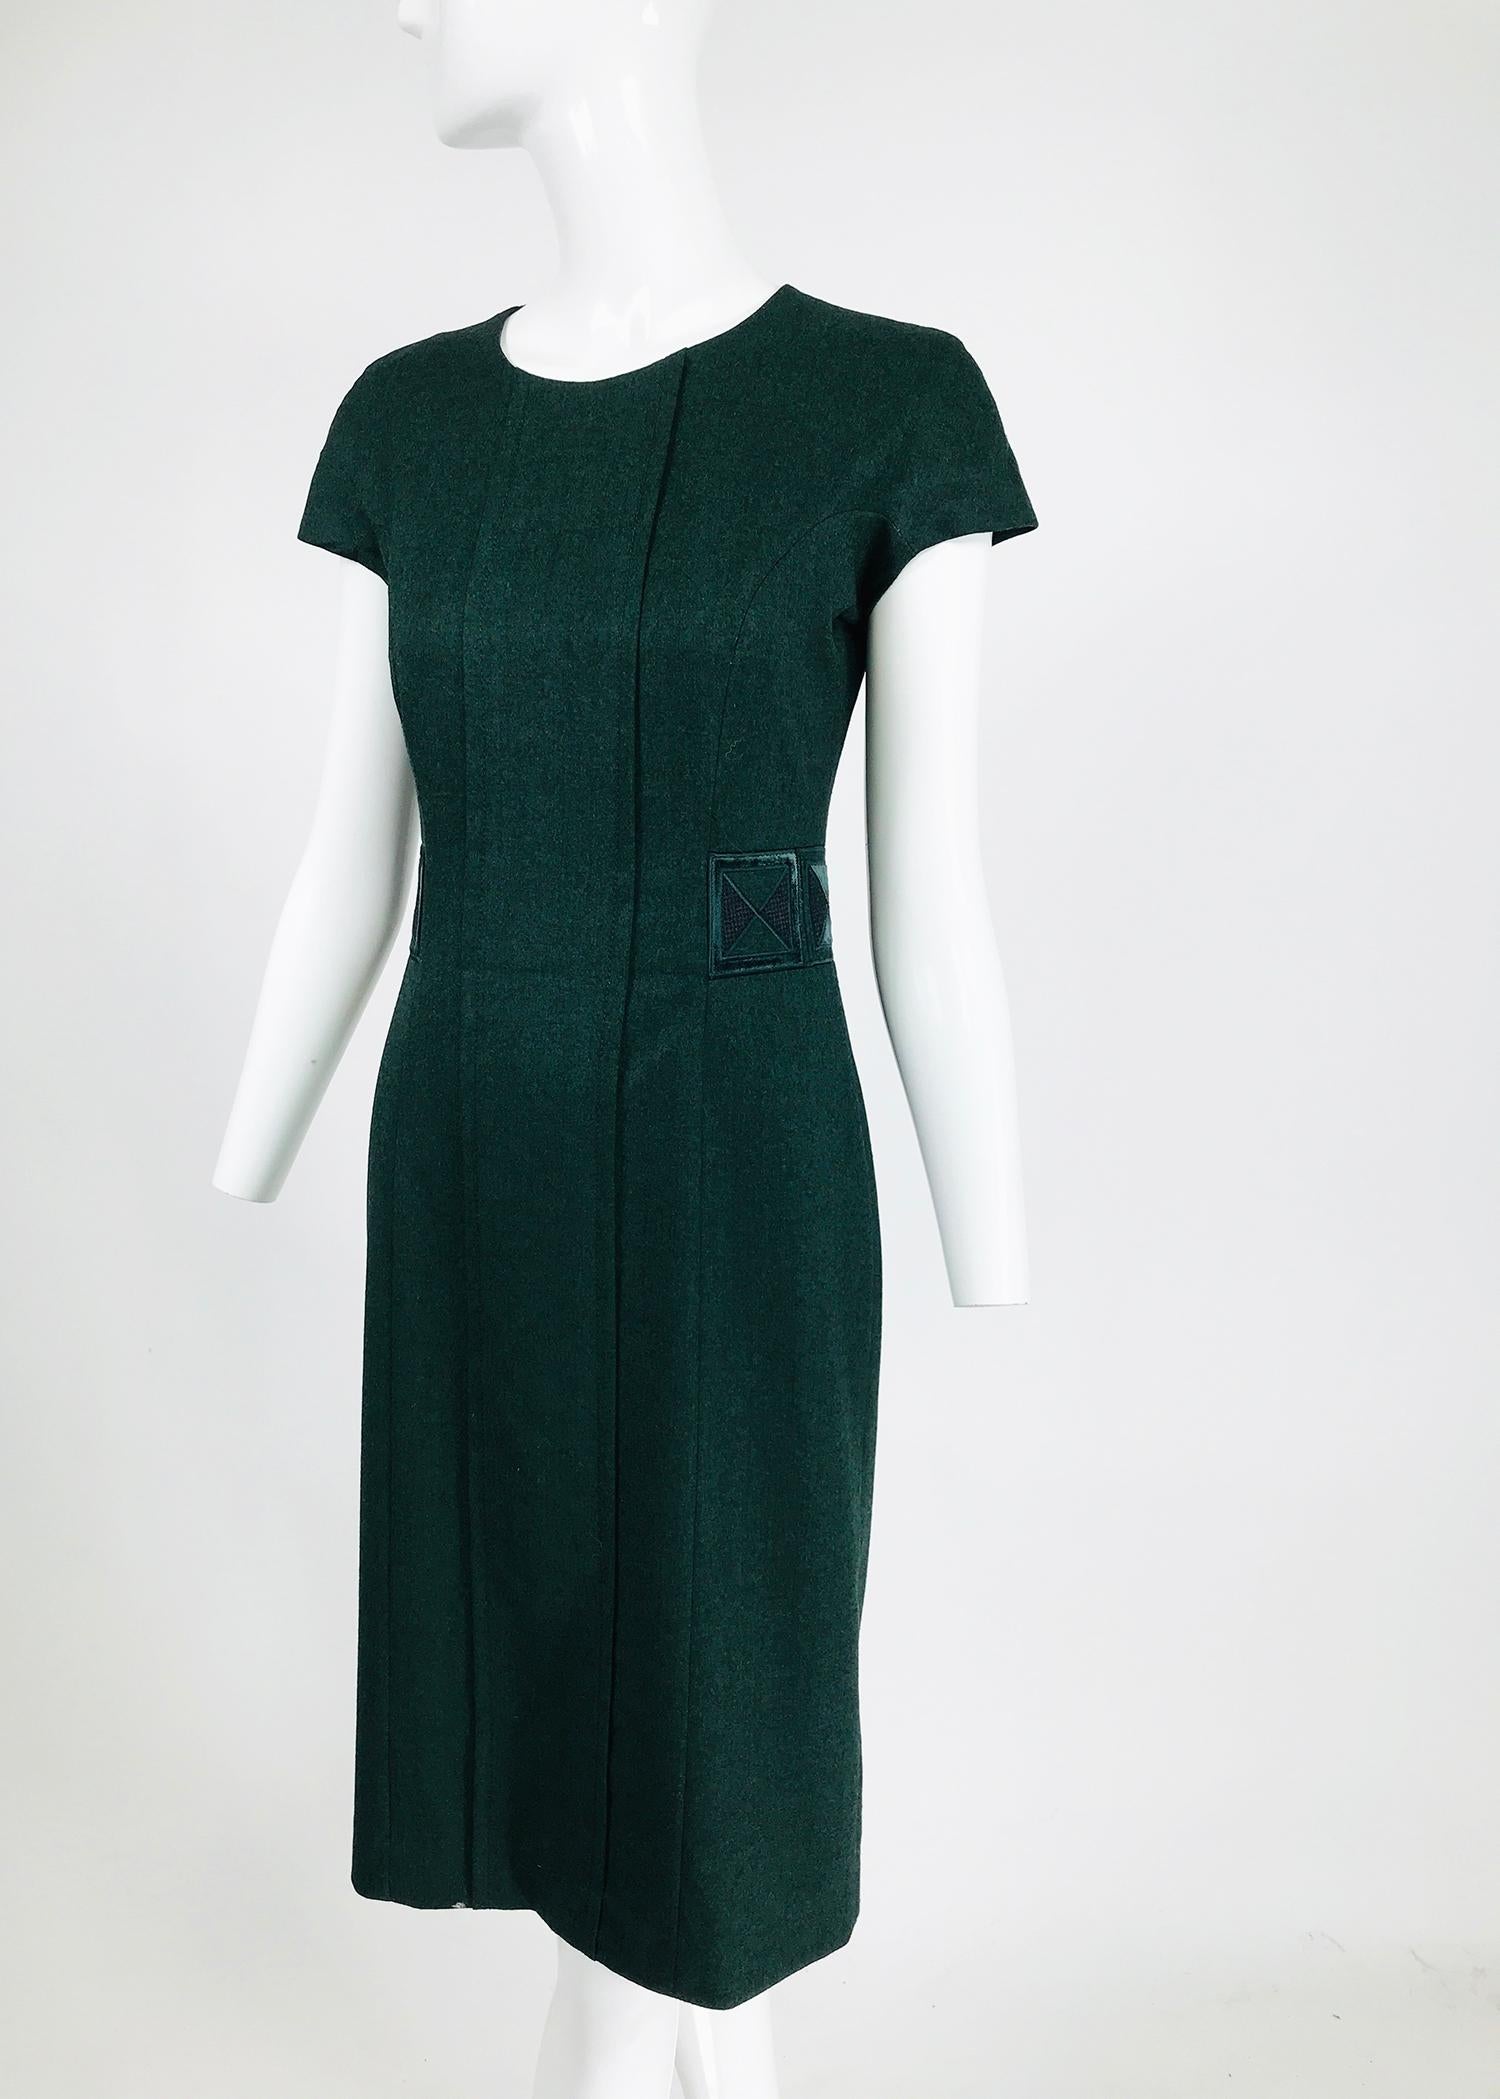 Etro Embroidered forest green fine, soft wool cap sleeve sheath dress. Sophisticated day dress in a subtle mixed fleck woven fabric. Jewel neckline dress has a seamed front panel, cap sleeves a fitted torso and skirt, there is an attached